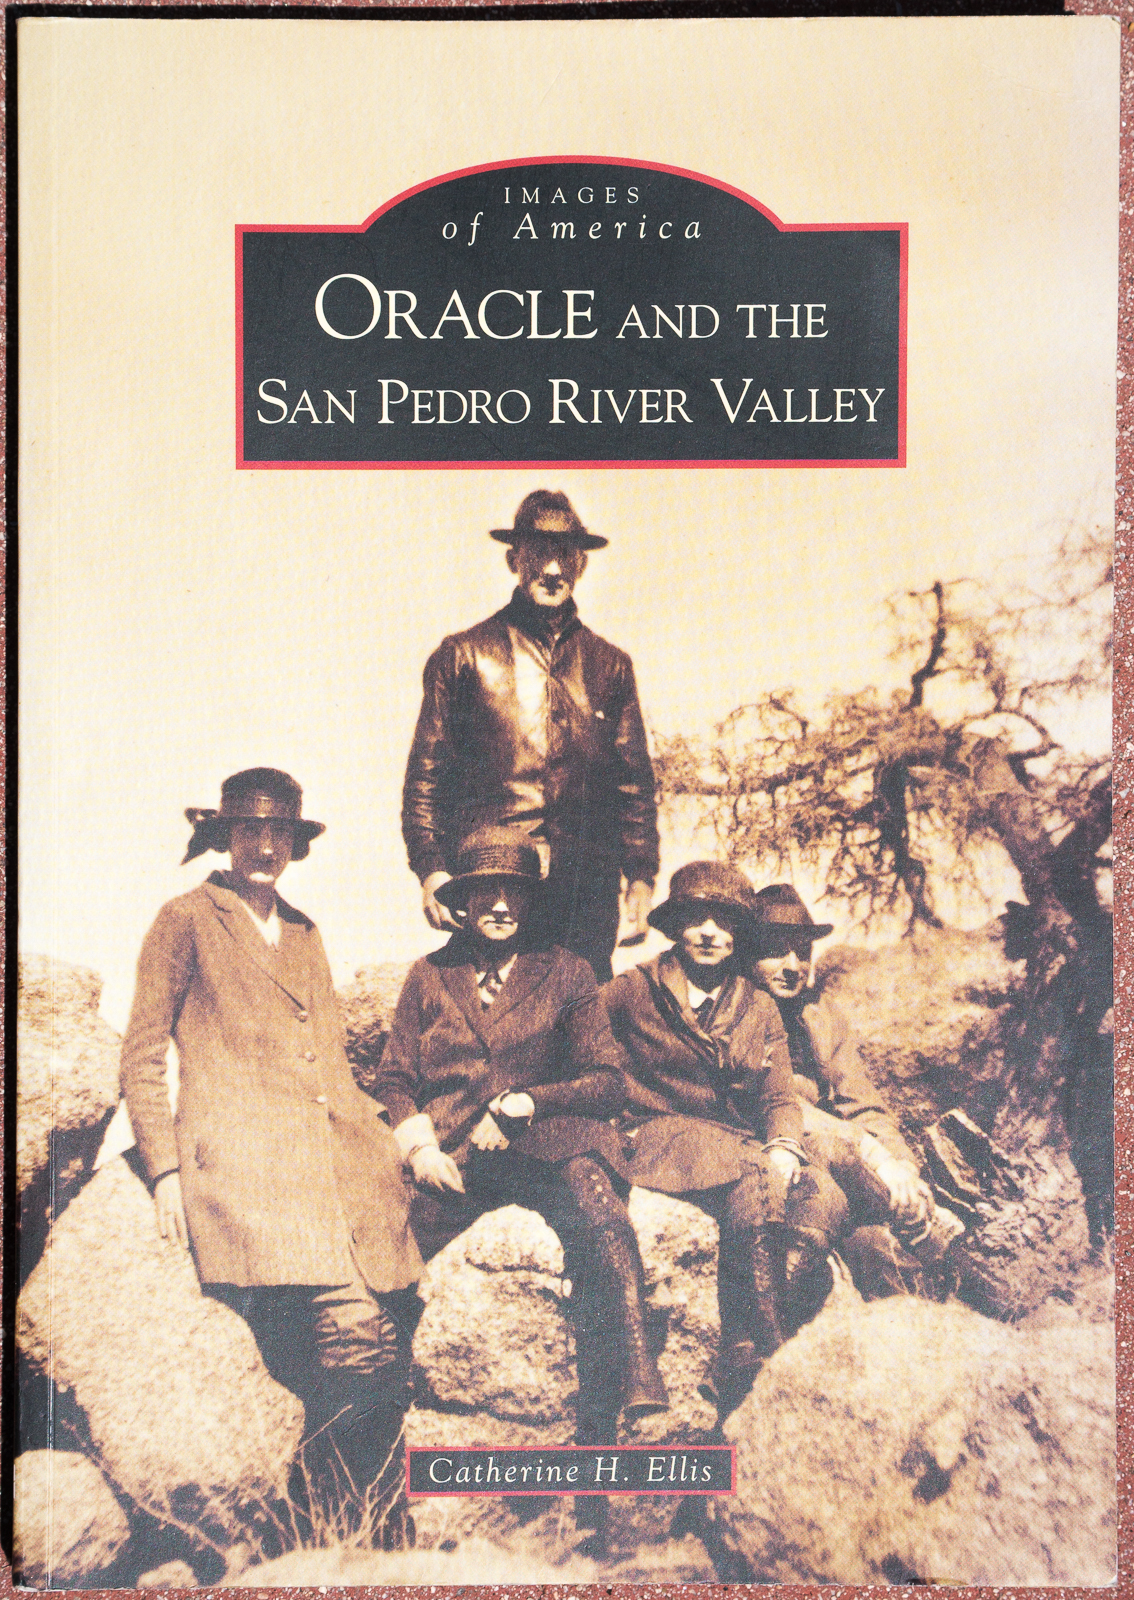 Oracle and the San Pedro River Valley - Images of America.